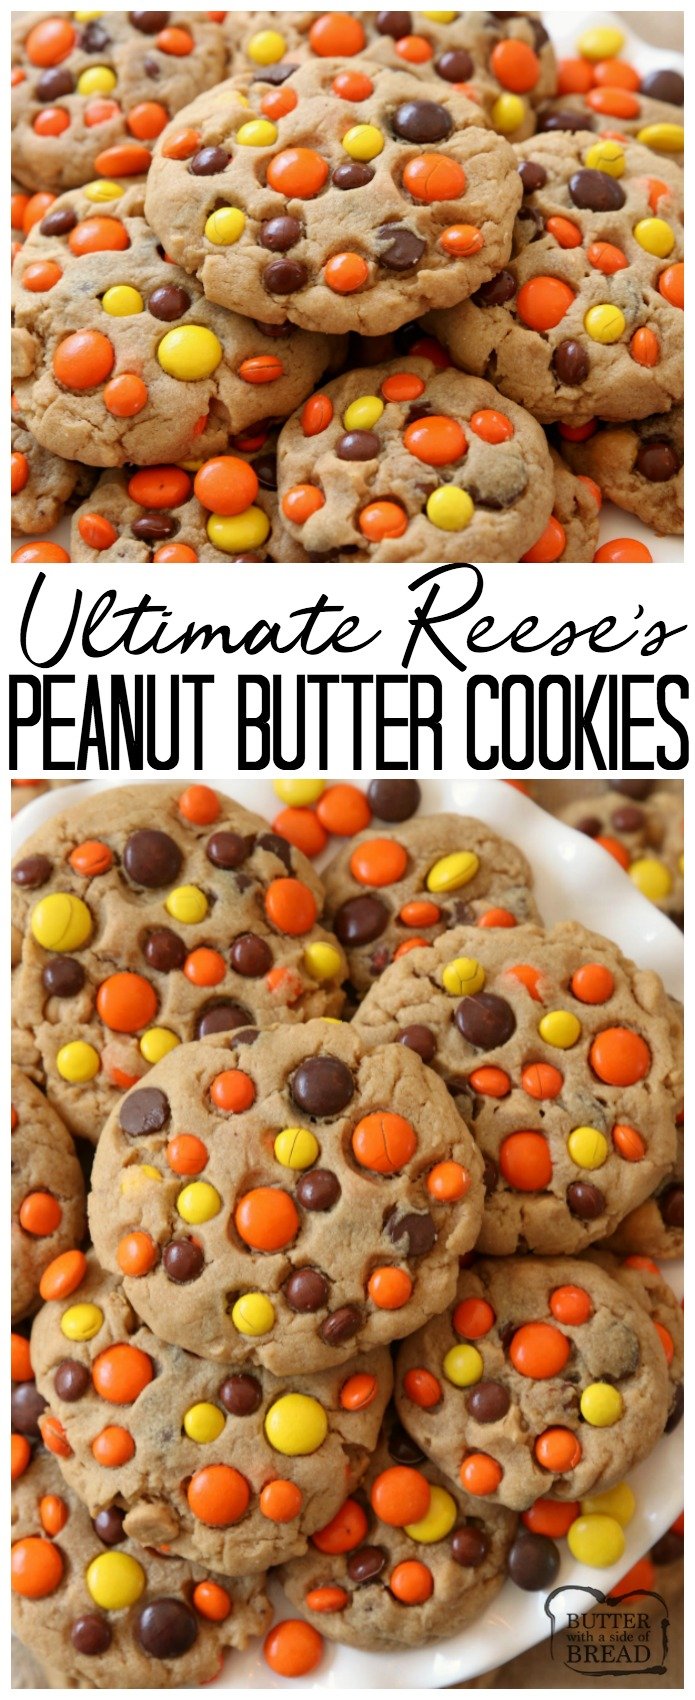 Best Ever Reese's Peanut Butter Cookies recipe made with a full cup of peanut butter! We added chocolate chips plus peanut butter chips & Reese's Pieces to our favorite peanut butter cookie recipe to get the ULTIMATE chocolate peanut butter cookies!
